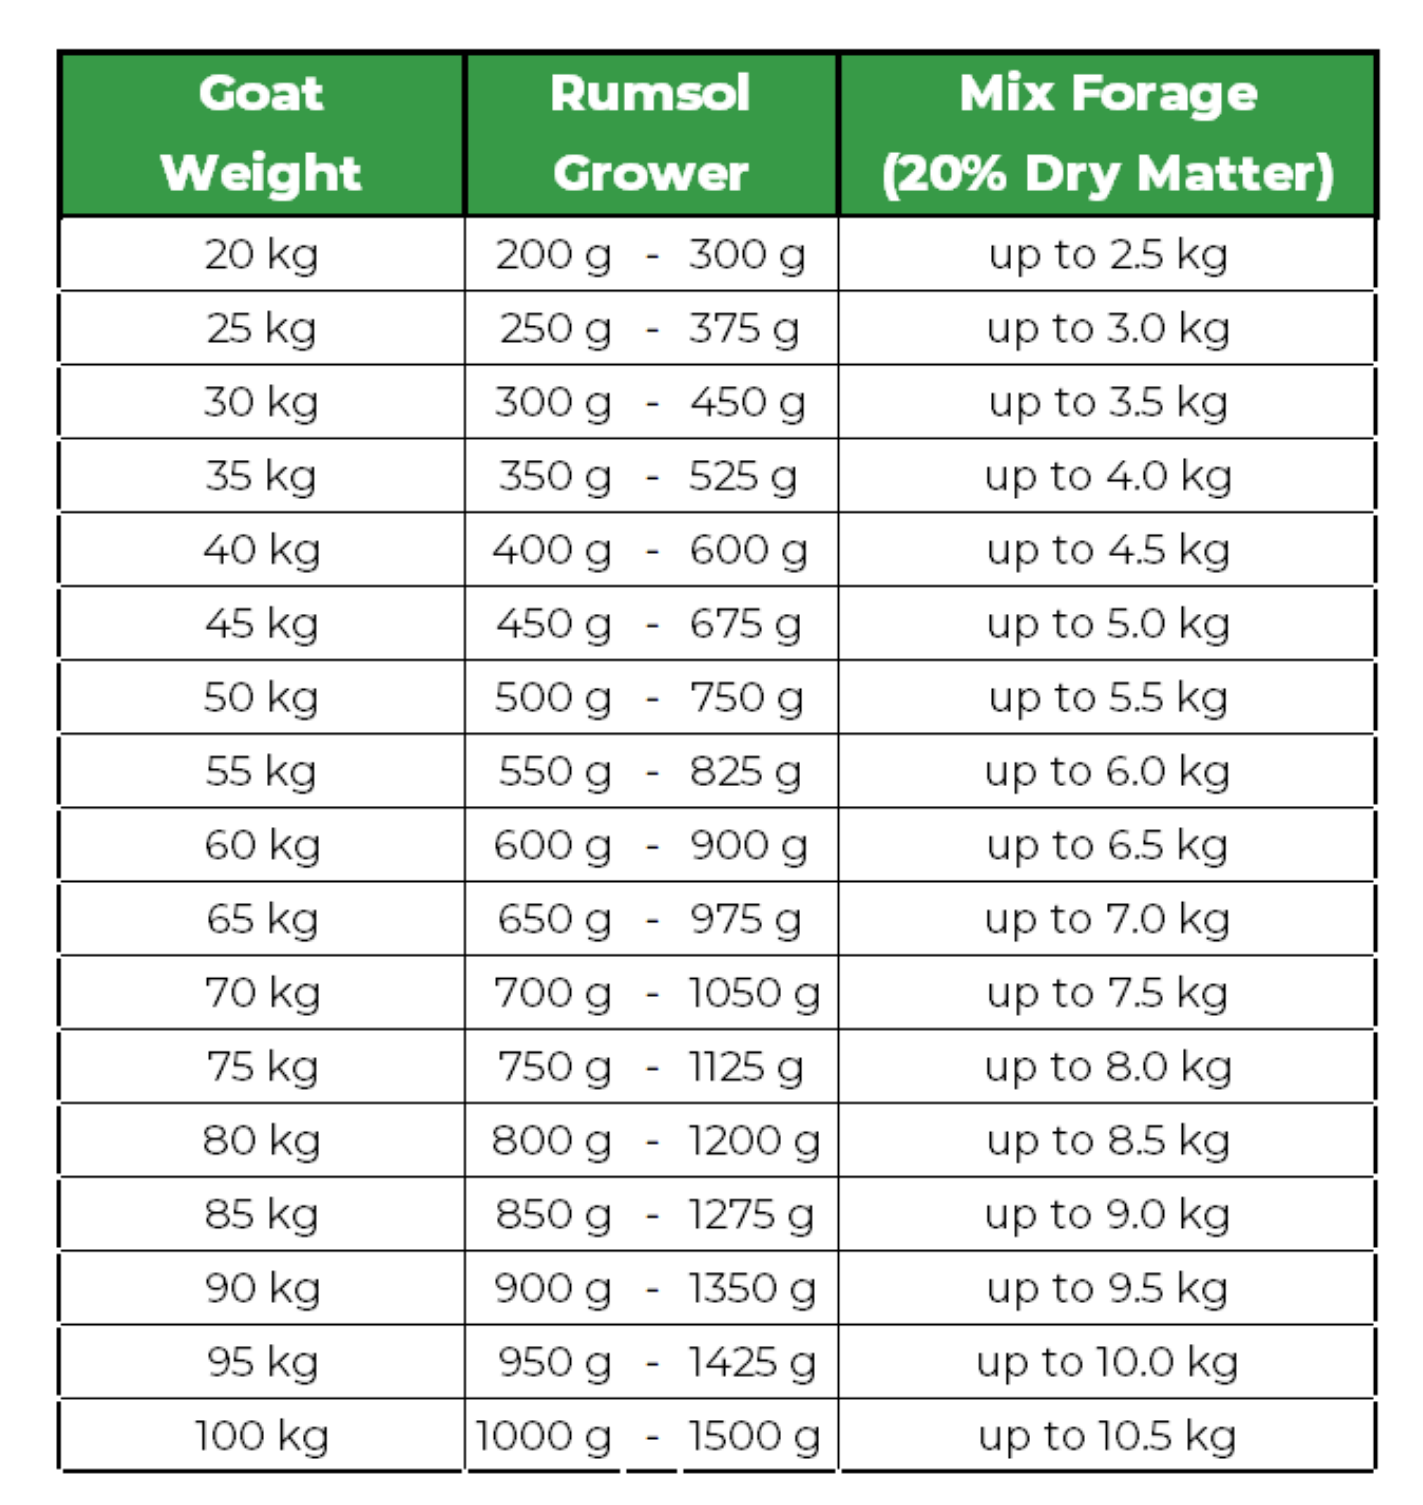 RumSol Goat Grower Concentrate Guide